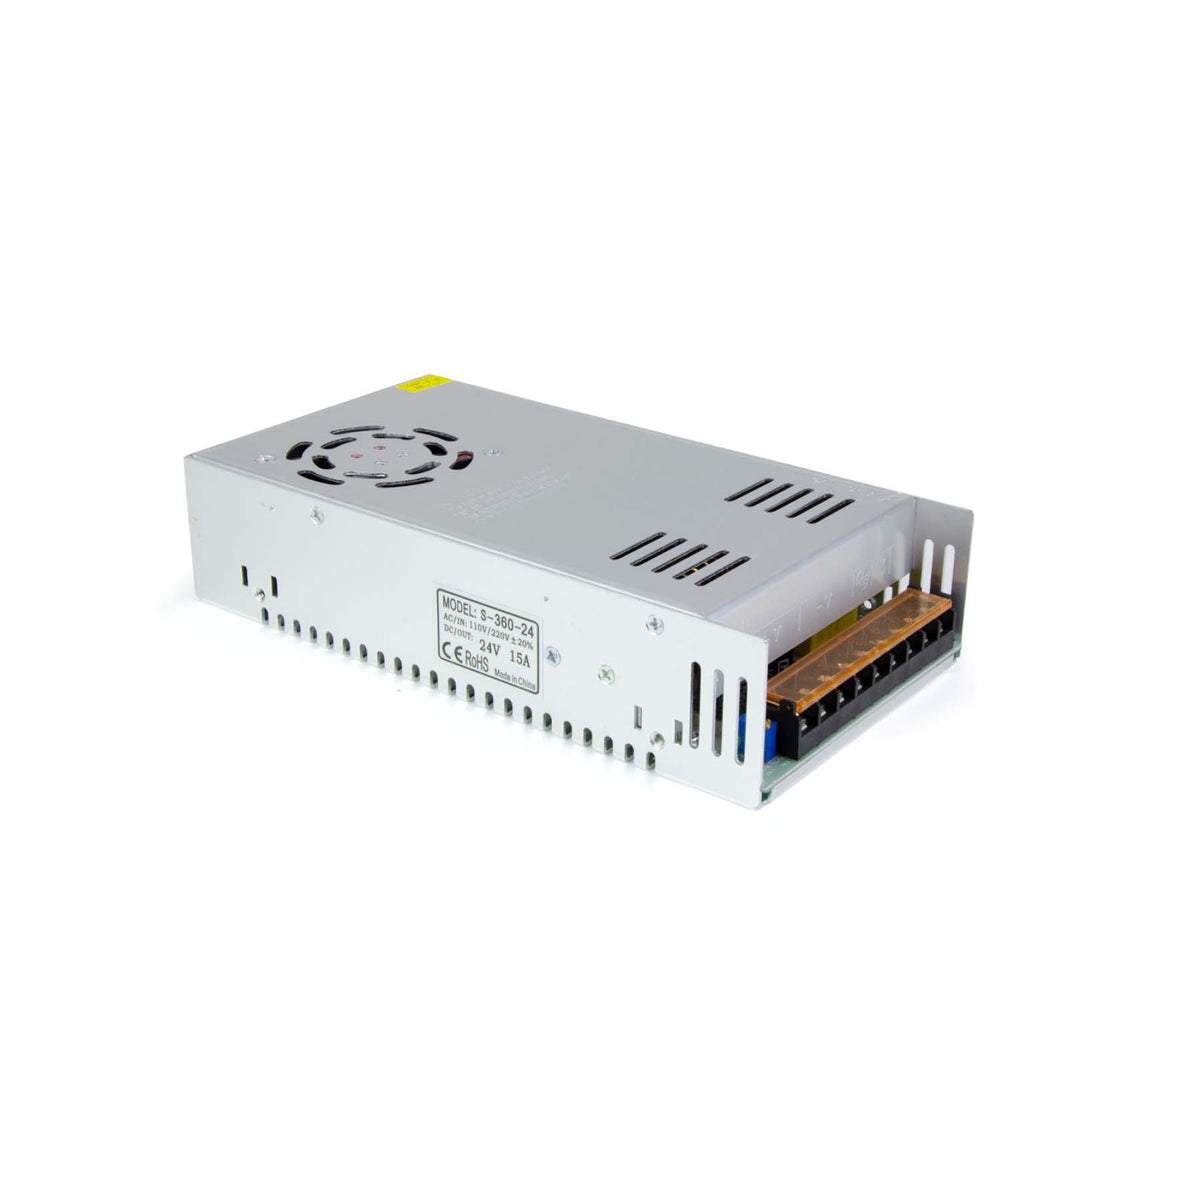 G.W.S LED Wholesale LED Drivers/LED Power Supplies IP20 (Non-Waterproof) / 24V / 360W 24V 15A 360W LED Driver